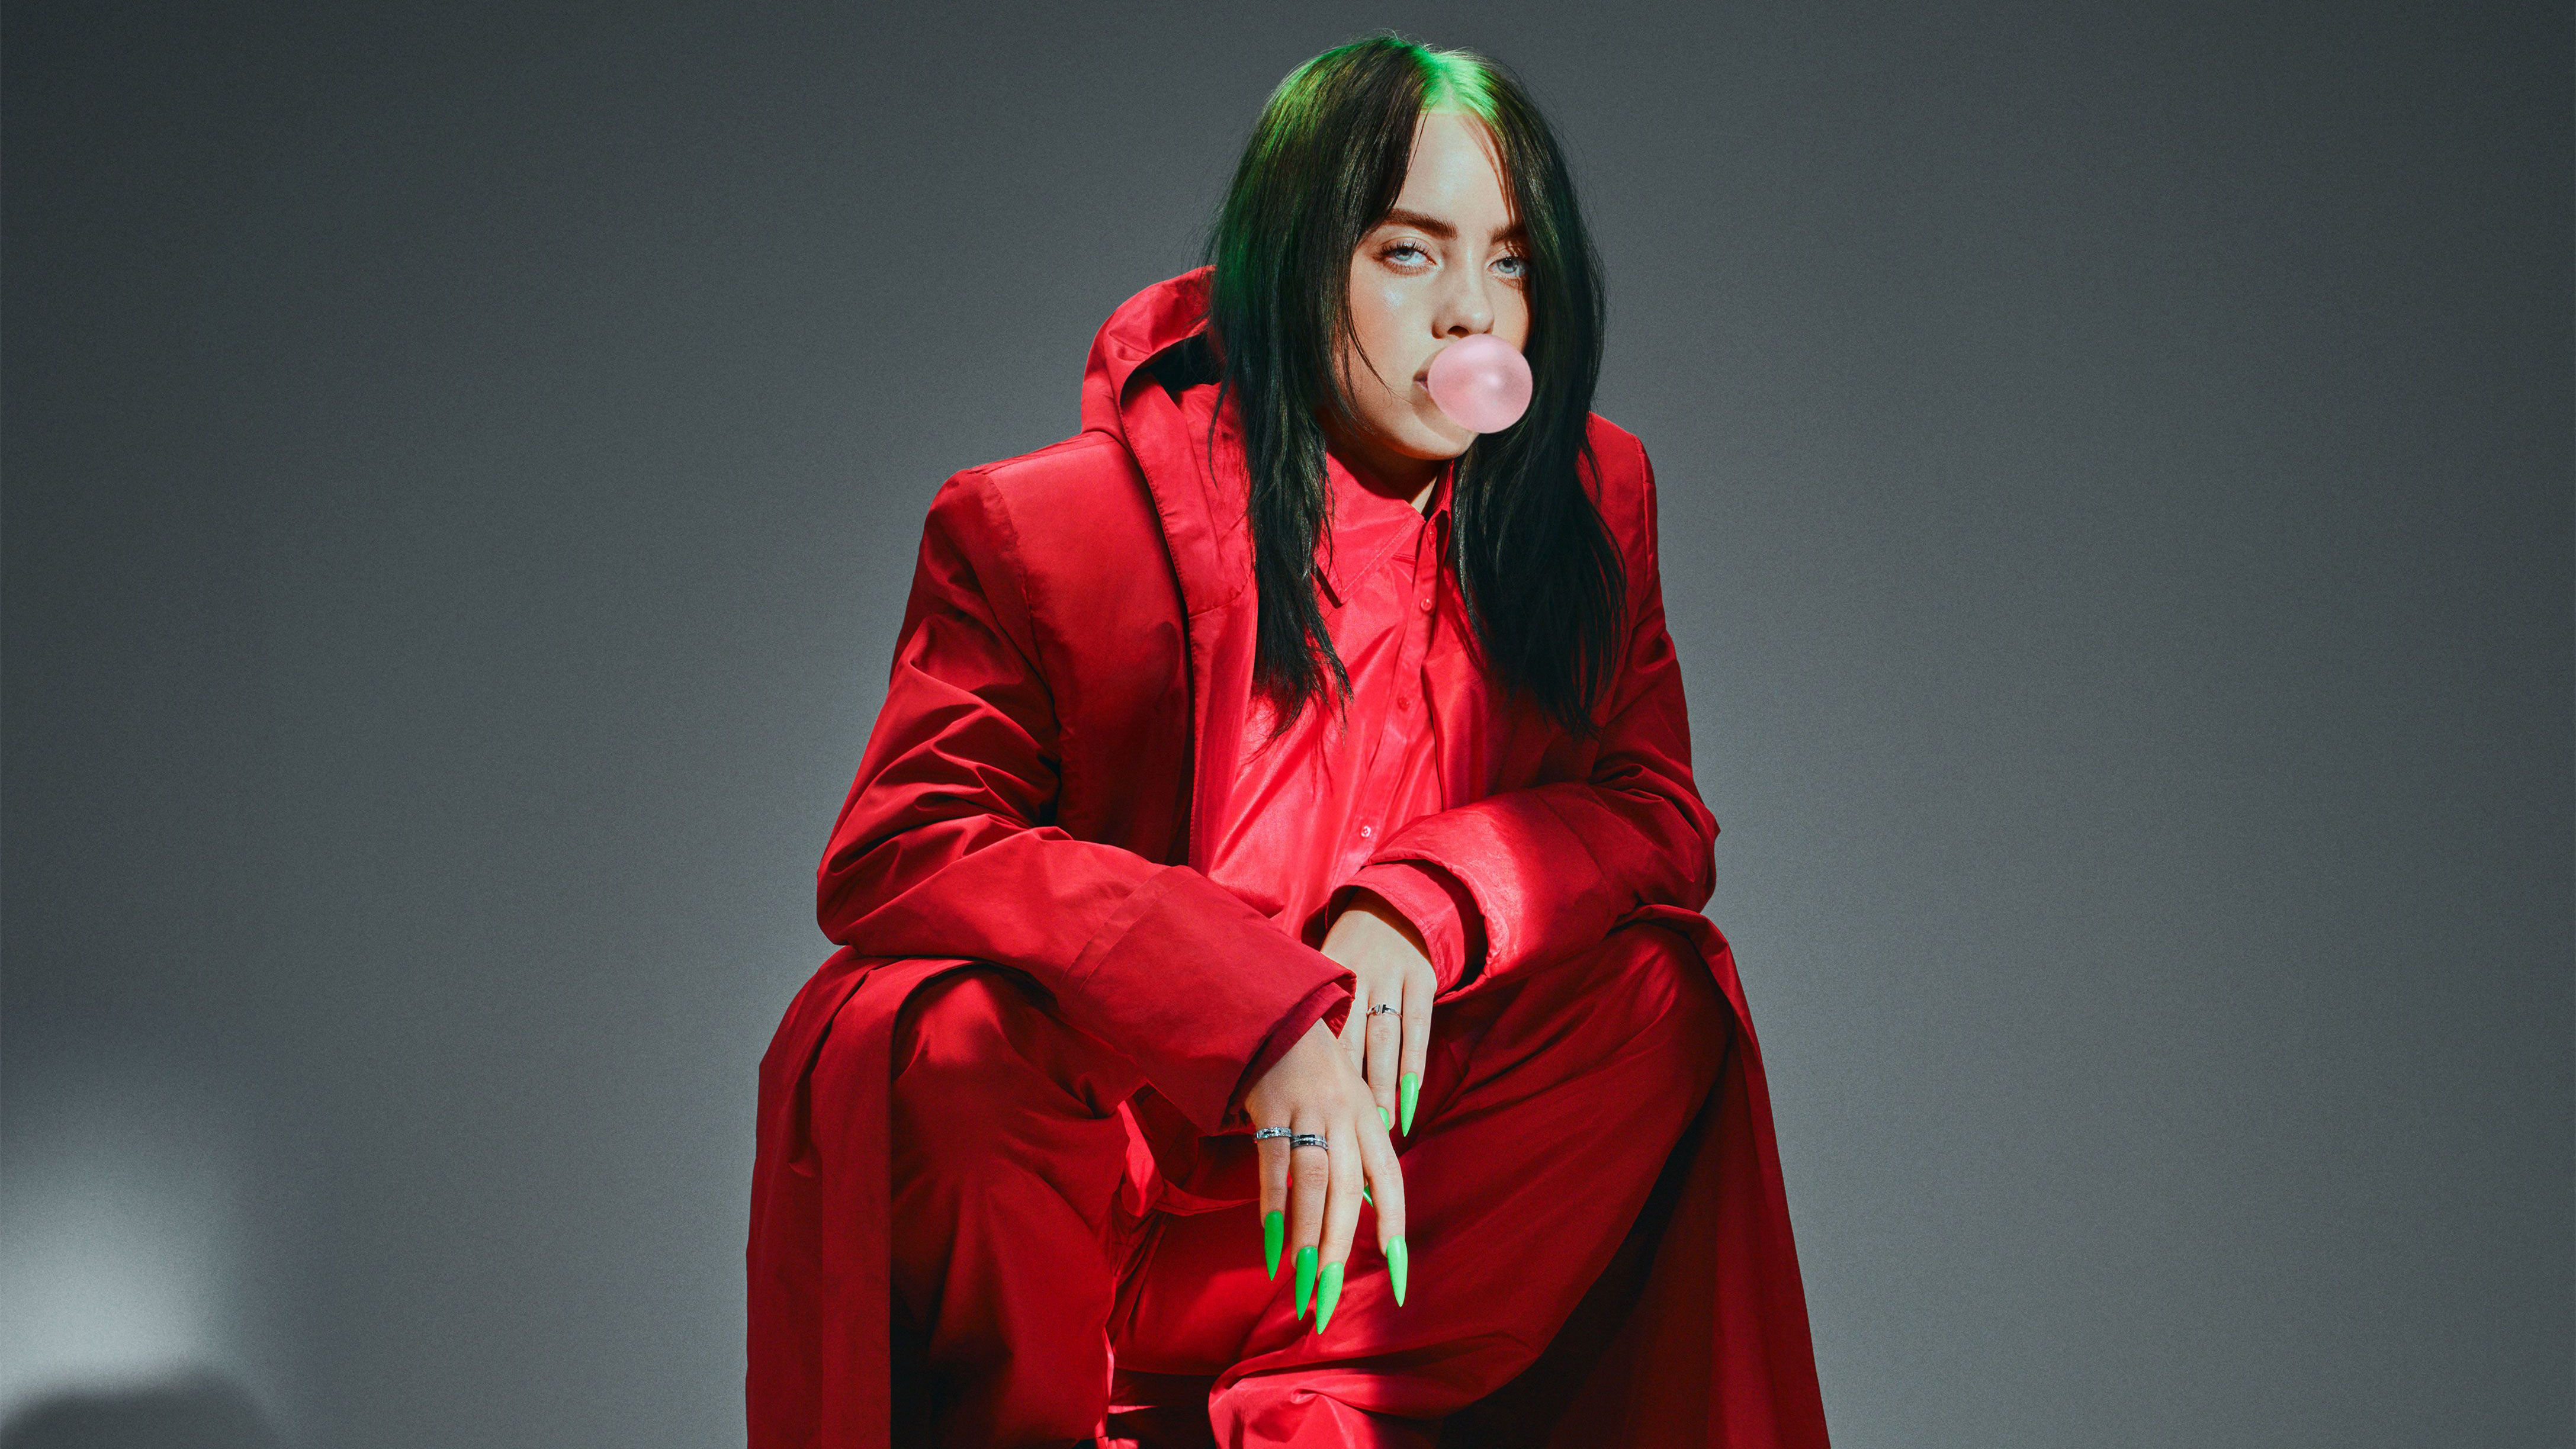 Billie Eilish Green Nails Green Hair Bubble Gum Suits Red Buttons Clothes Musician Thick Eyebrows Co 4350x2447